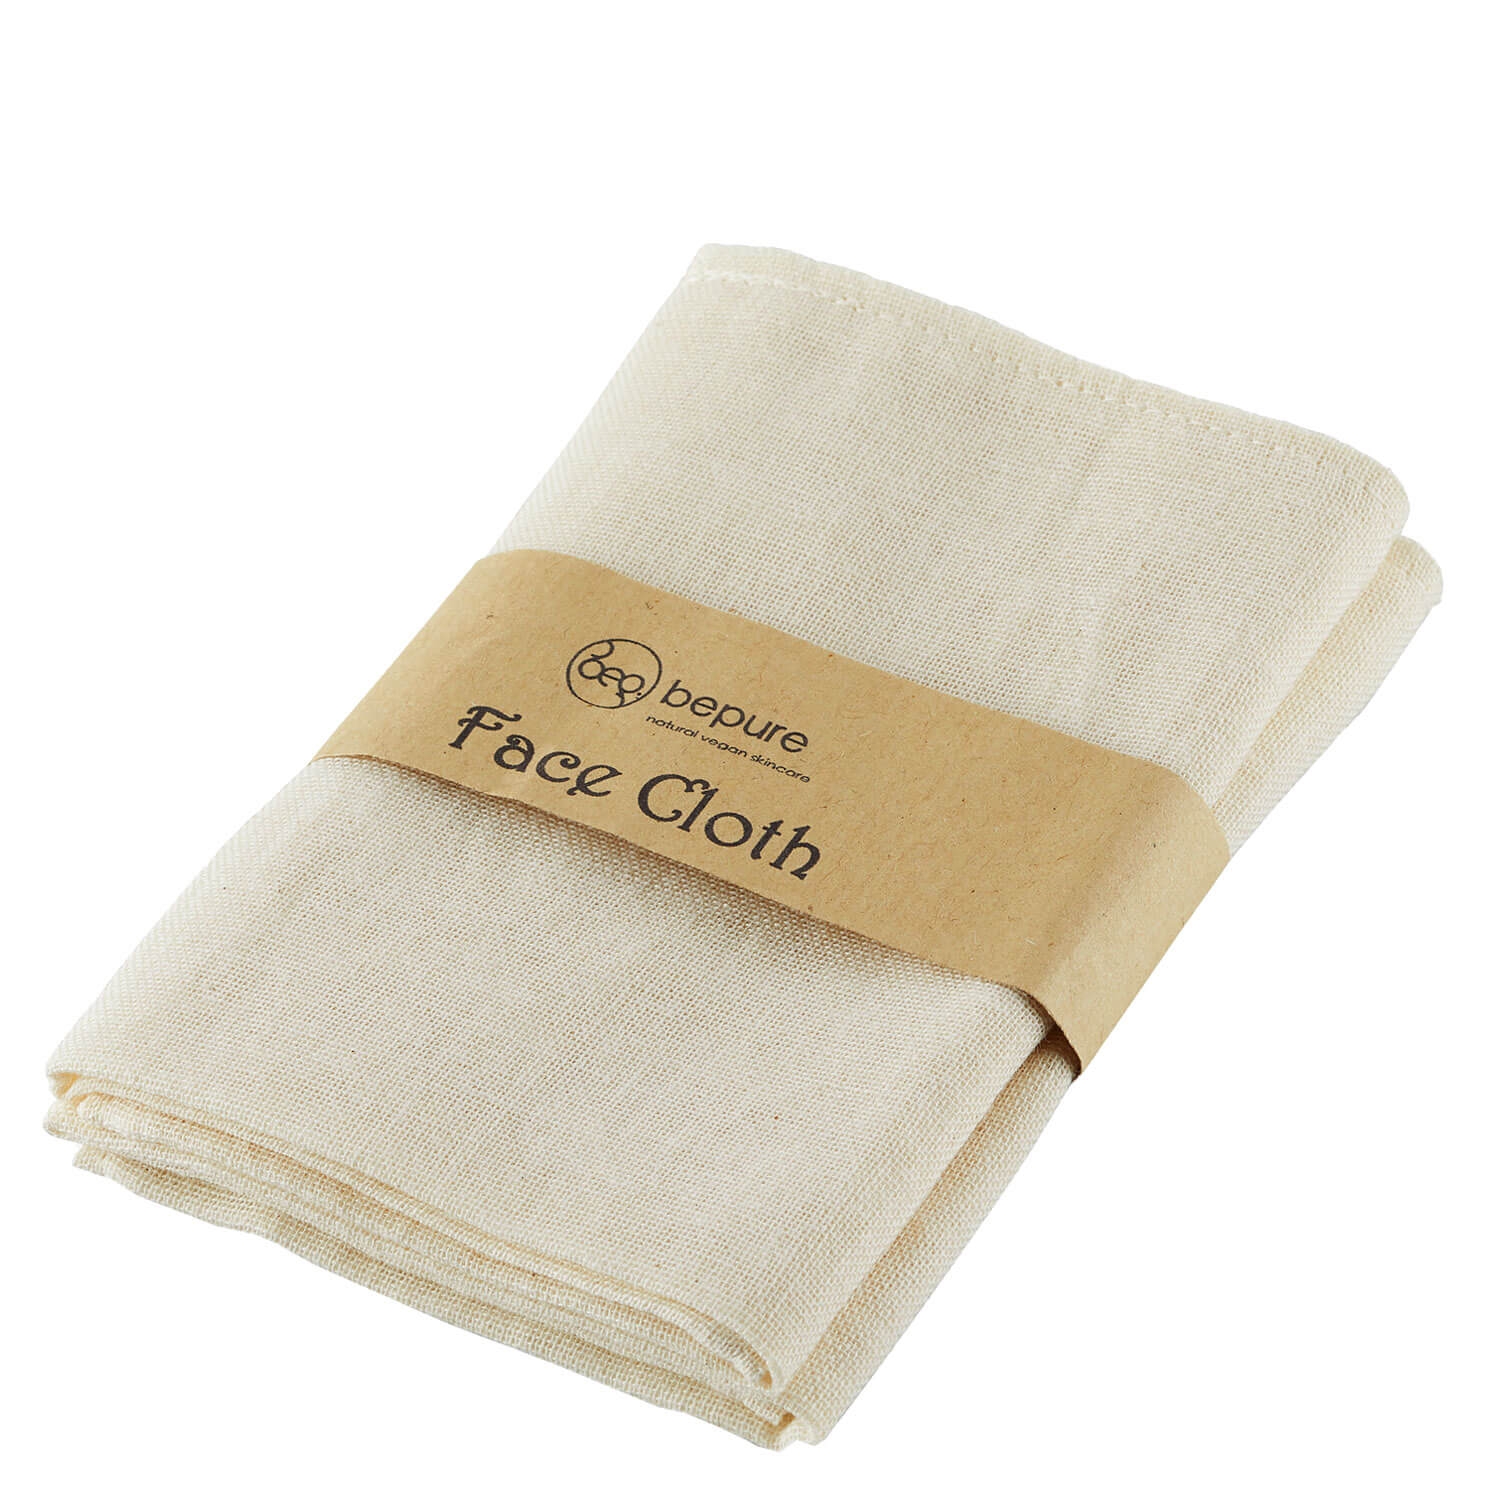 Product image from bepure - ORGANIC FACE CLOTH (2er Pack)